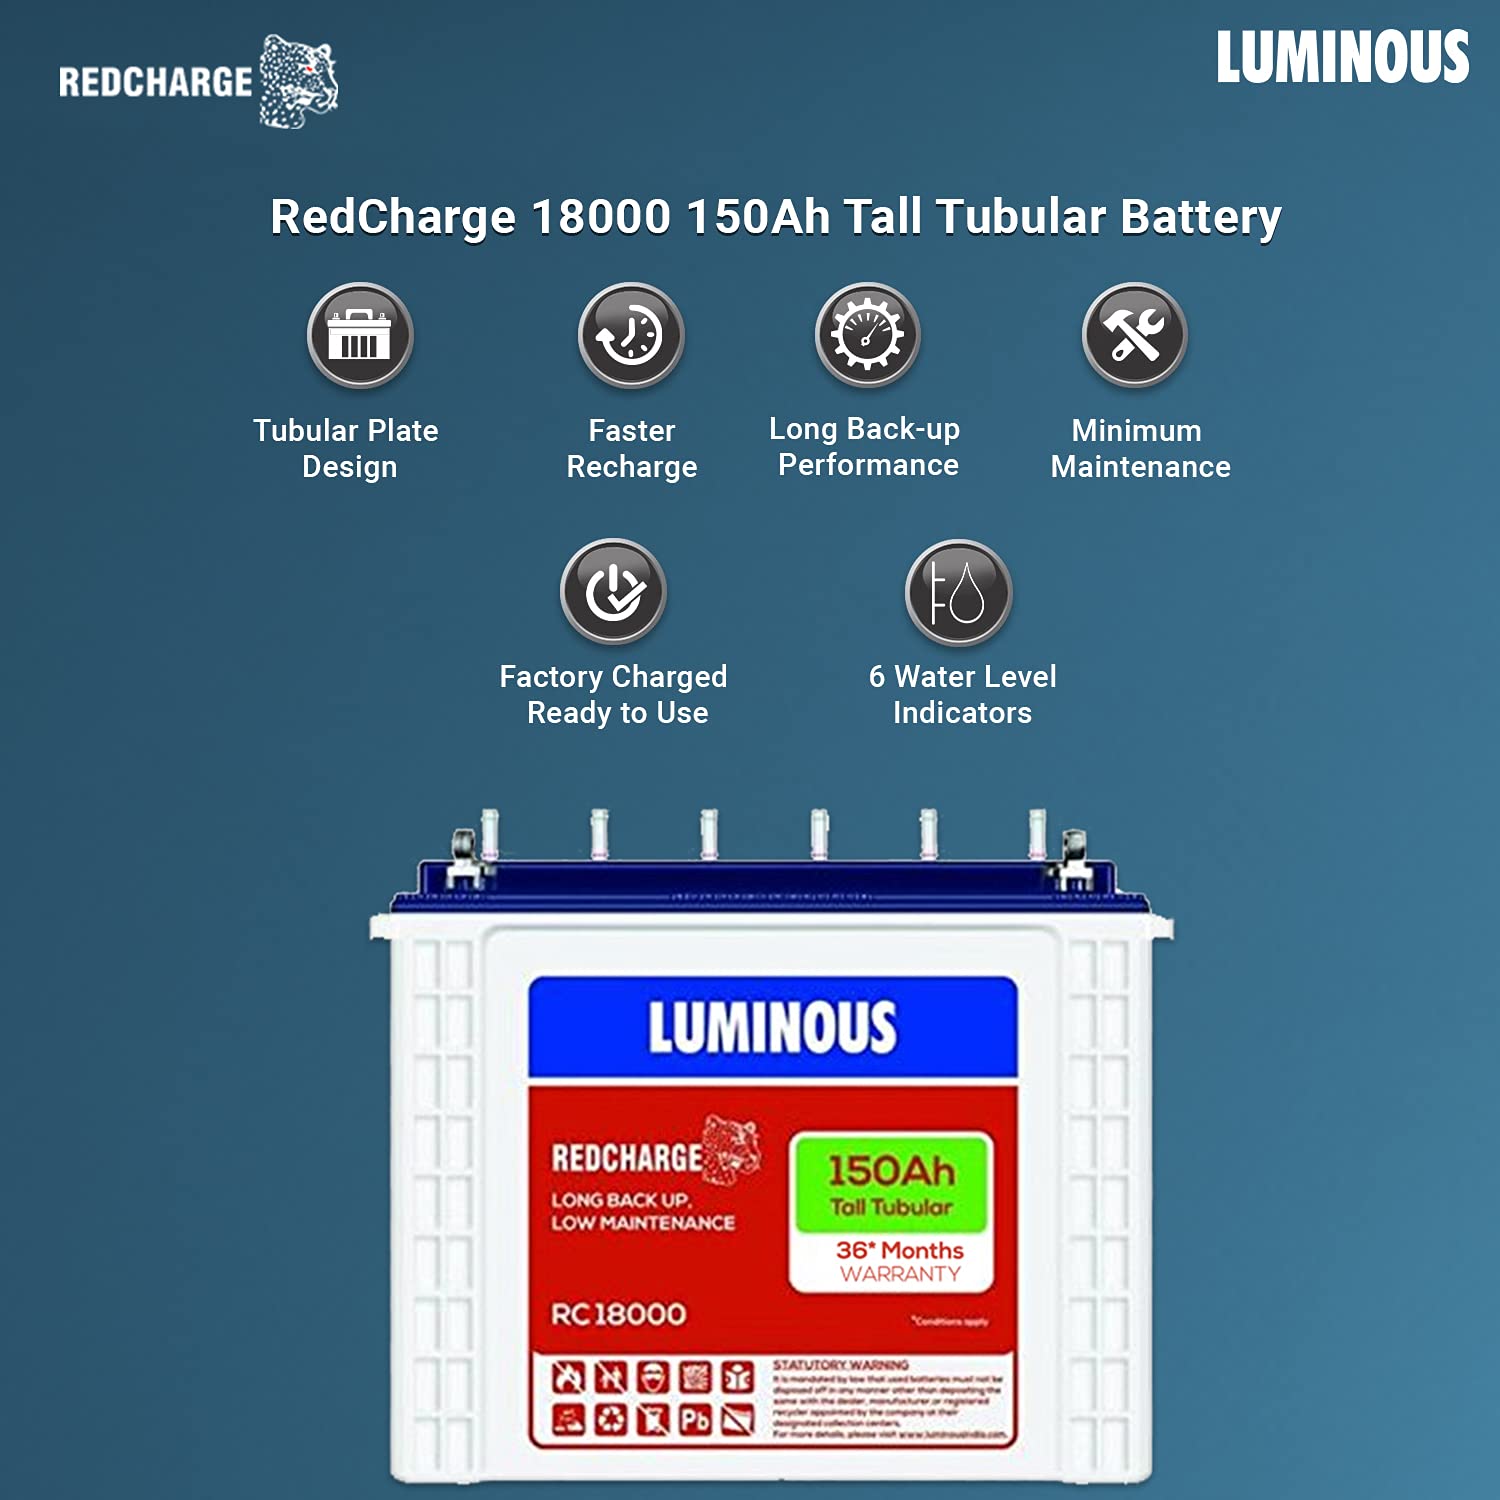 Luminous Redcharge 150Ah RC18000 tall tubular battery 36*Month warranty